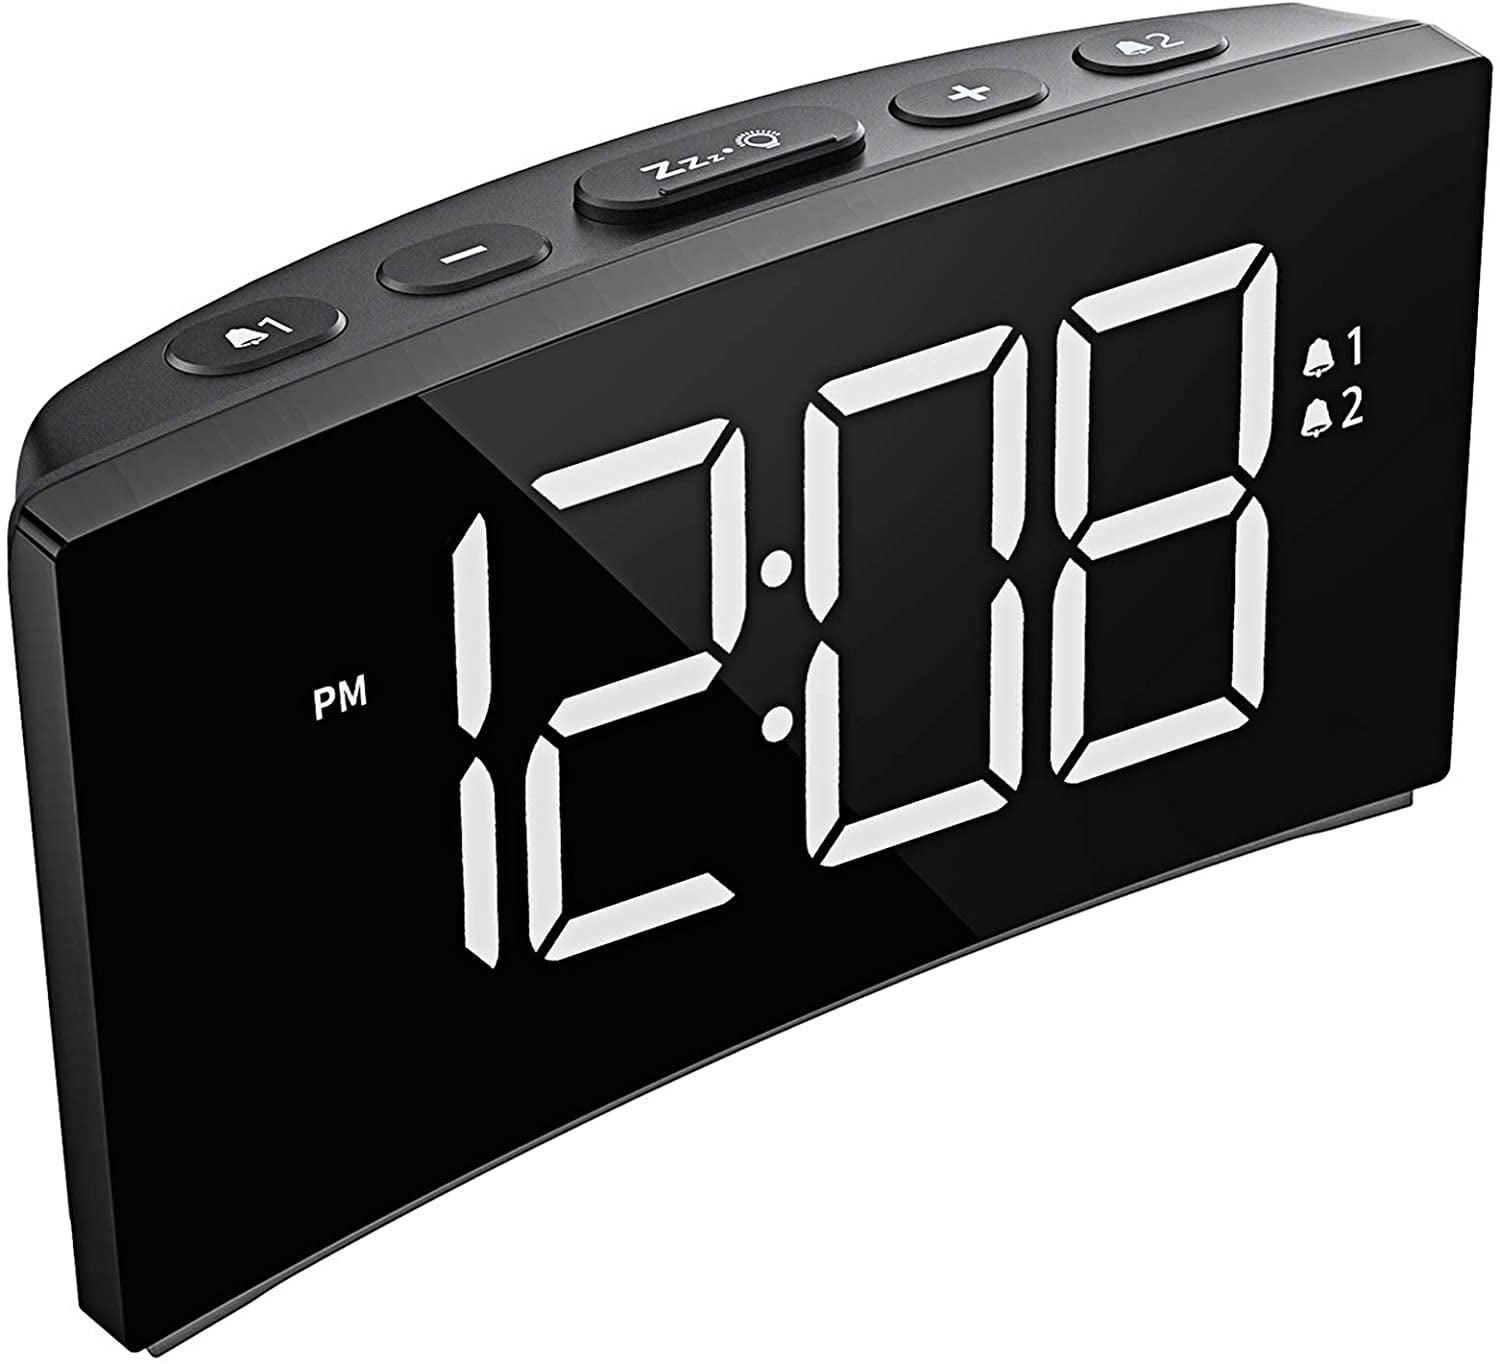 3 Alarm Sounds Snooze Digital Alarm Clock for Bedroom with 6 Brightness Dimmer and Dual Alarm Adapter not Included Mains Powered Alarm Clock 12/24-Hour Large Clear LED Display 3 Level Volume